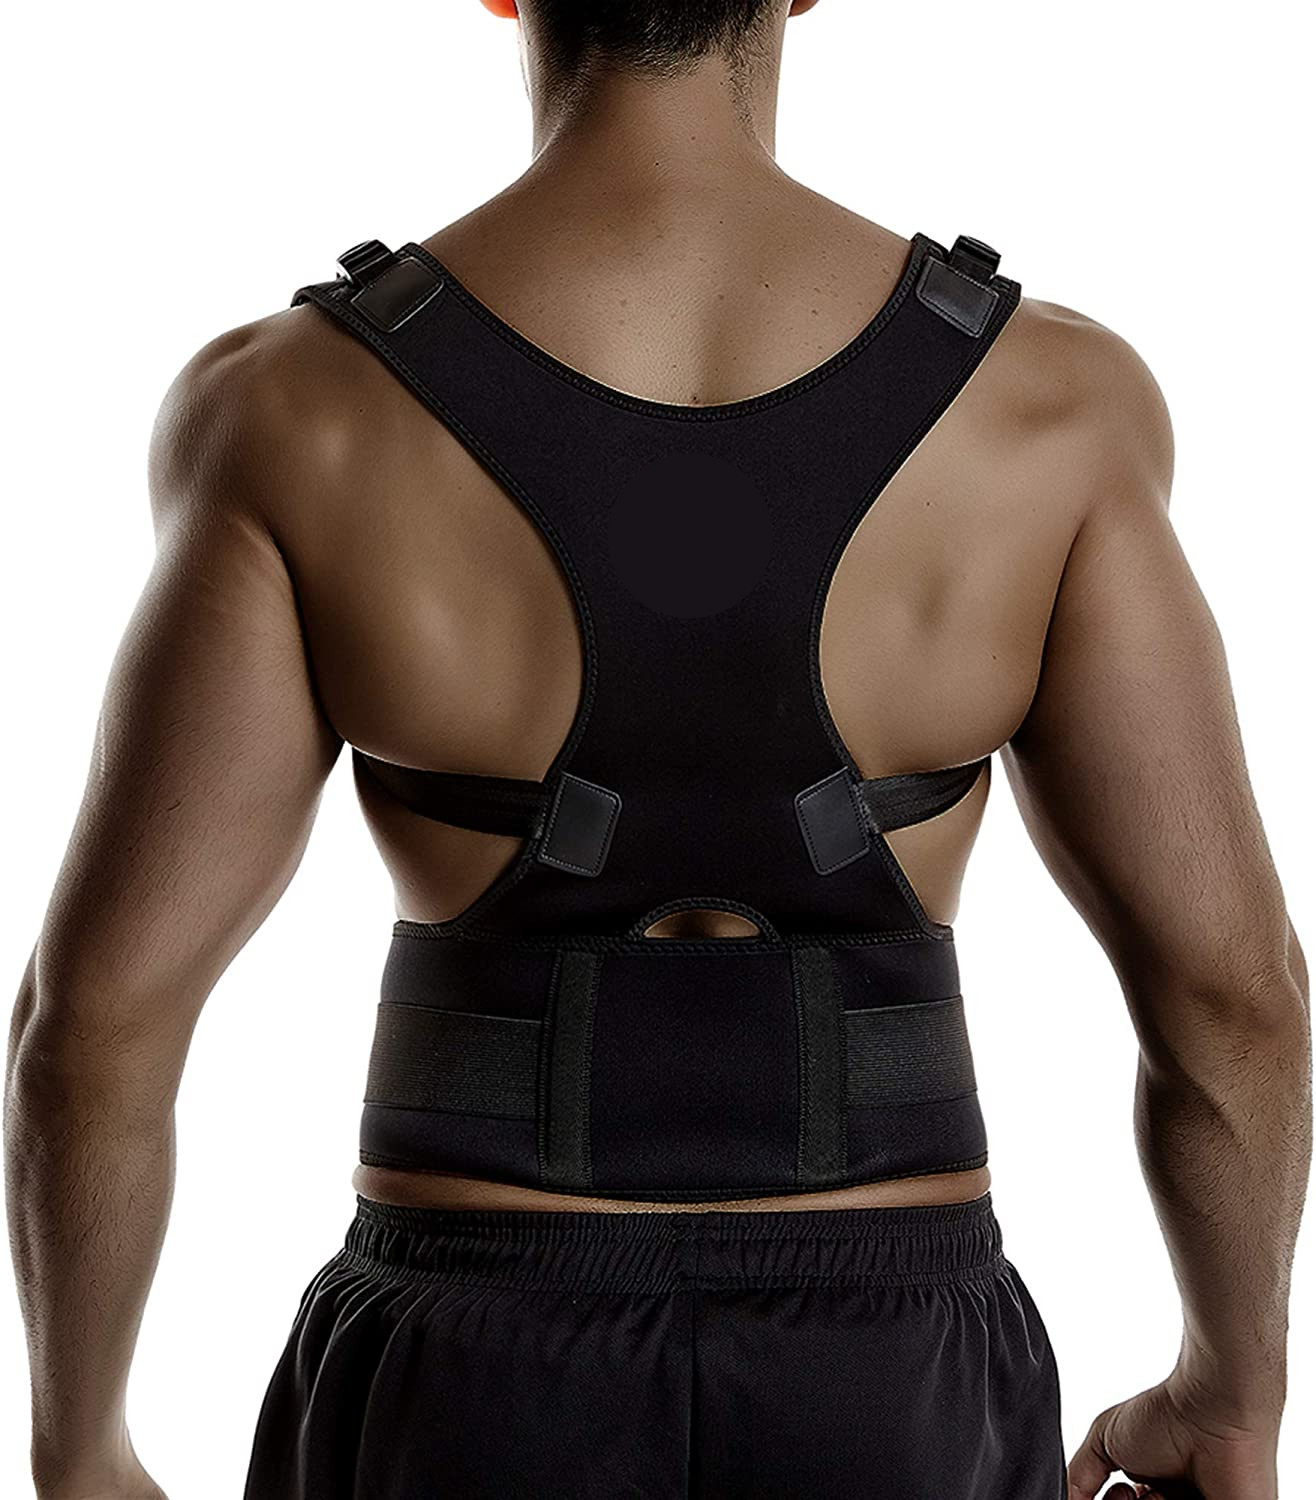 View Back Brace Posture Corrector Spinal Support